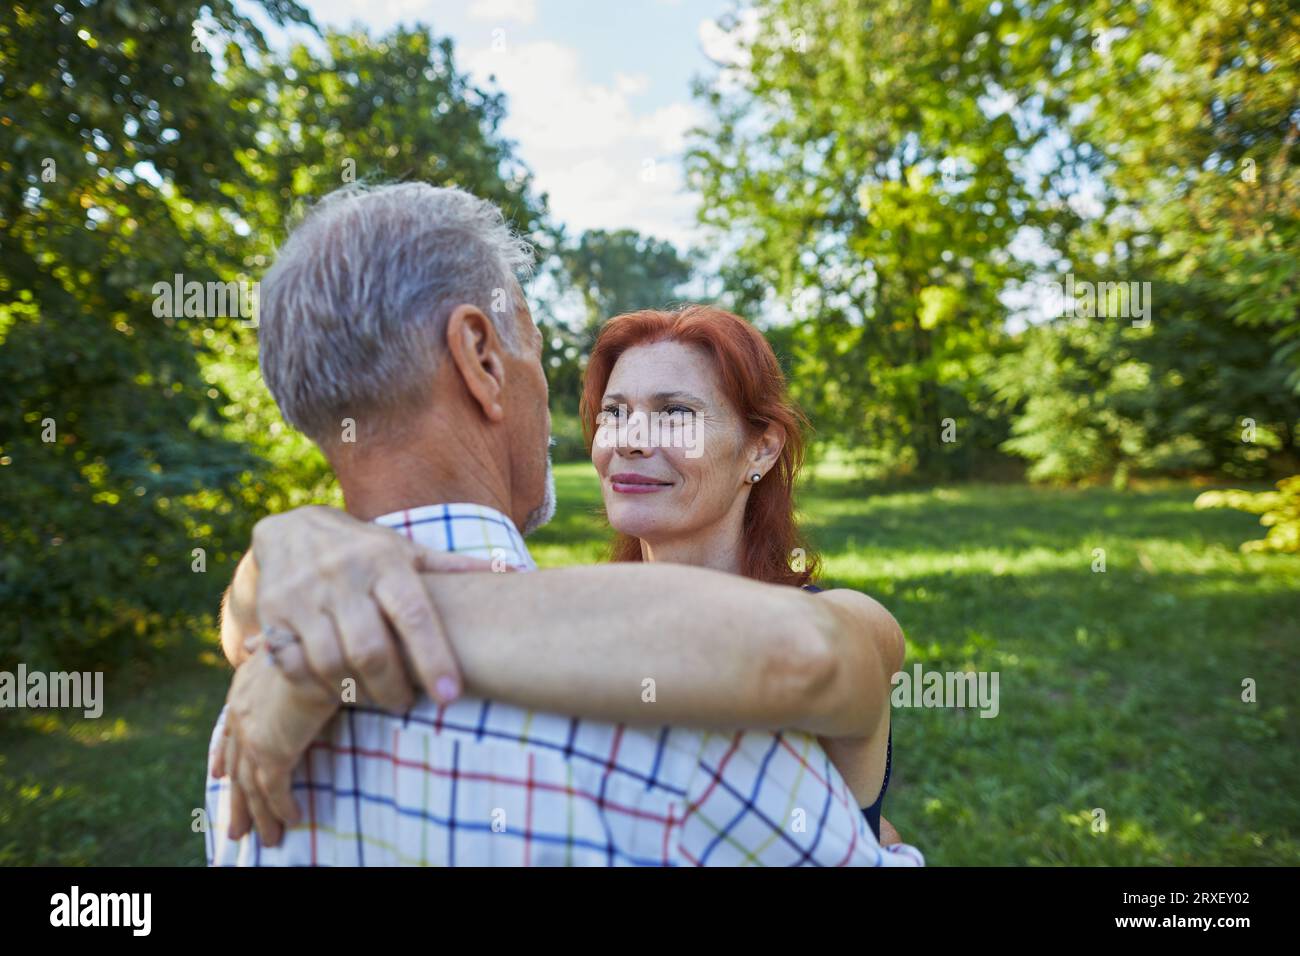 smiling senior woman with red hair hugs a man and looks at him Stock Photo